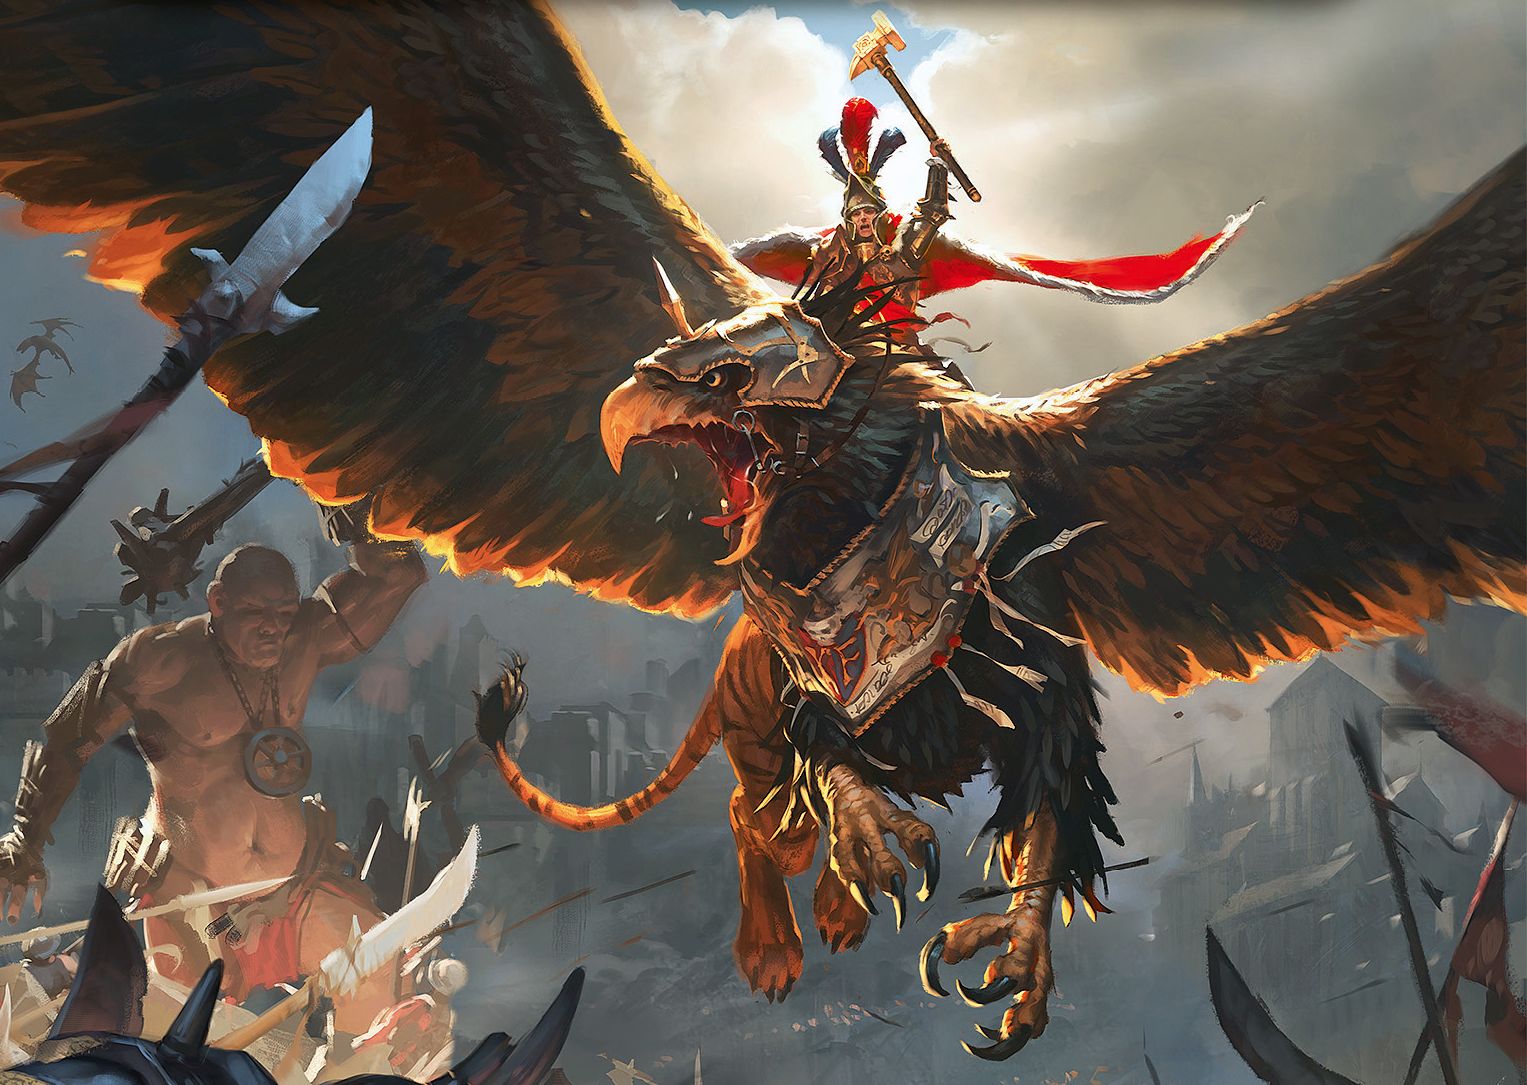 Image for Total War: Warhammer release date pushed to May, minimum PC specs finalized